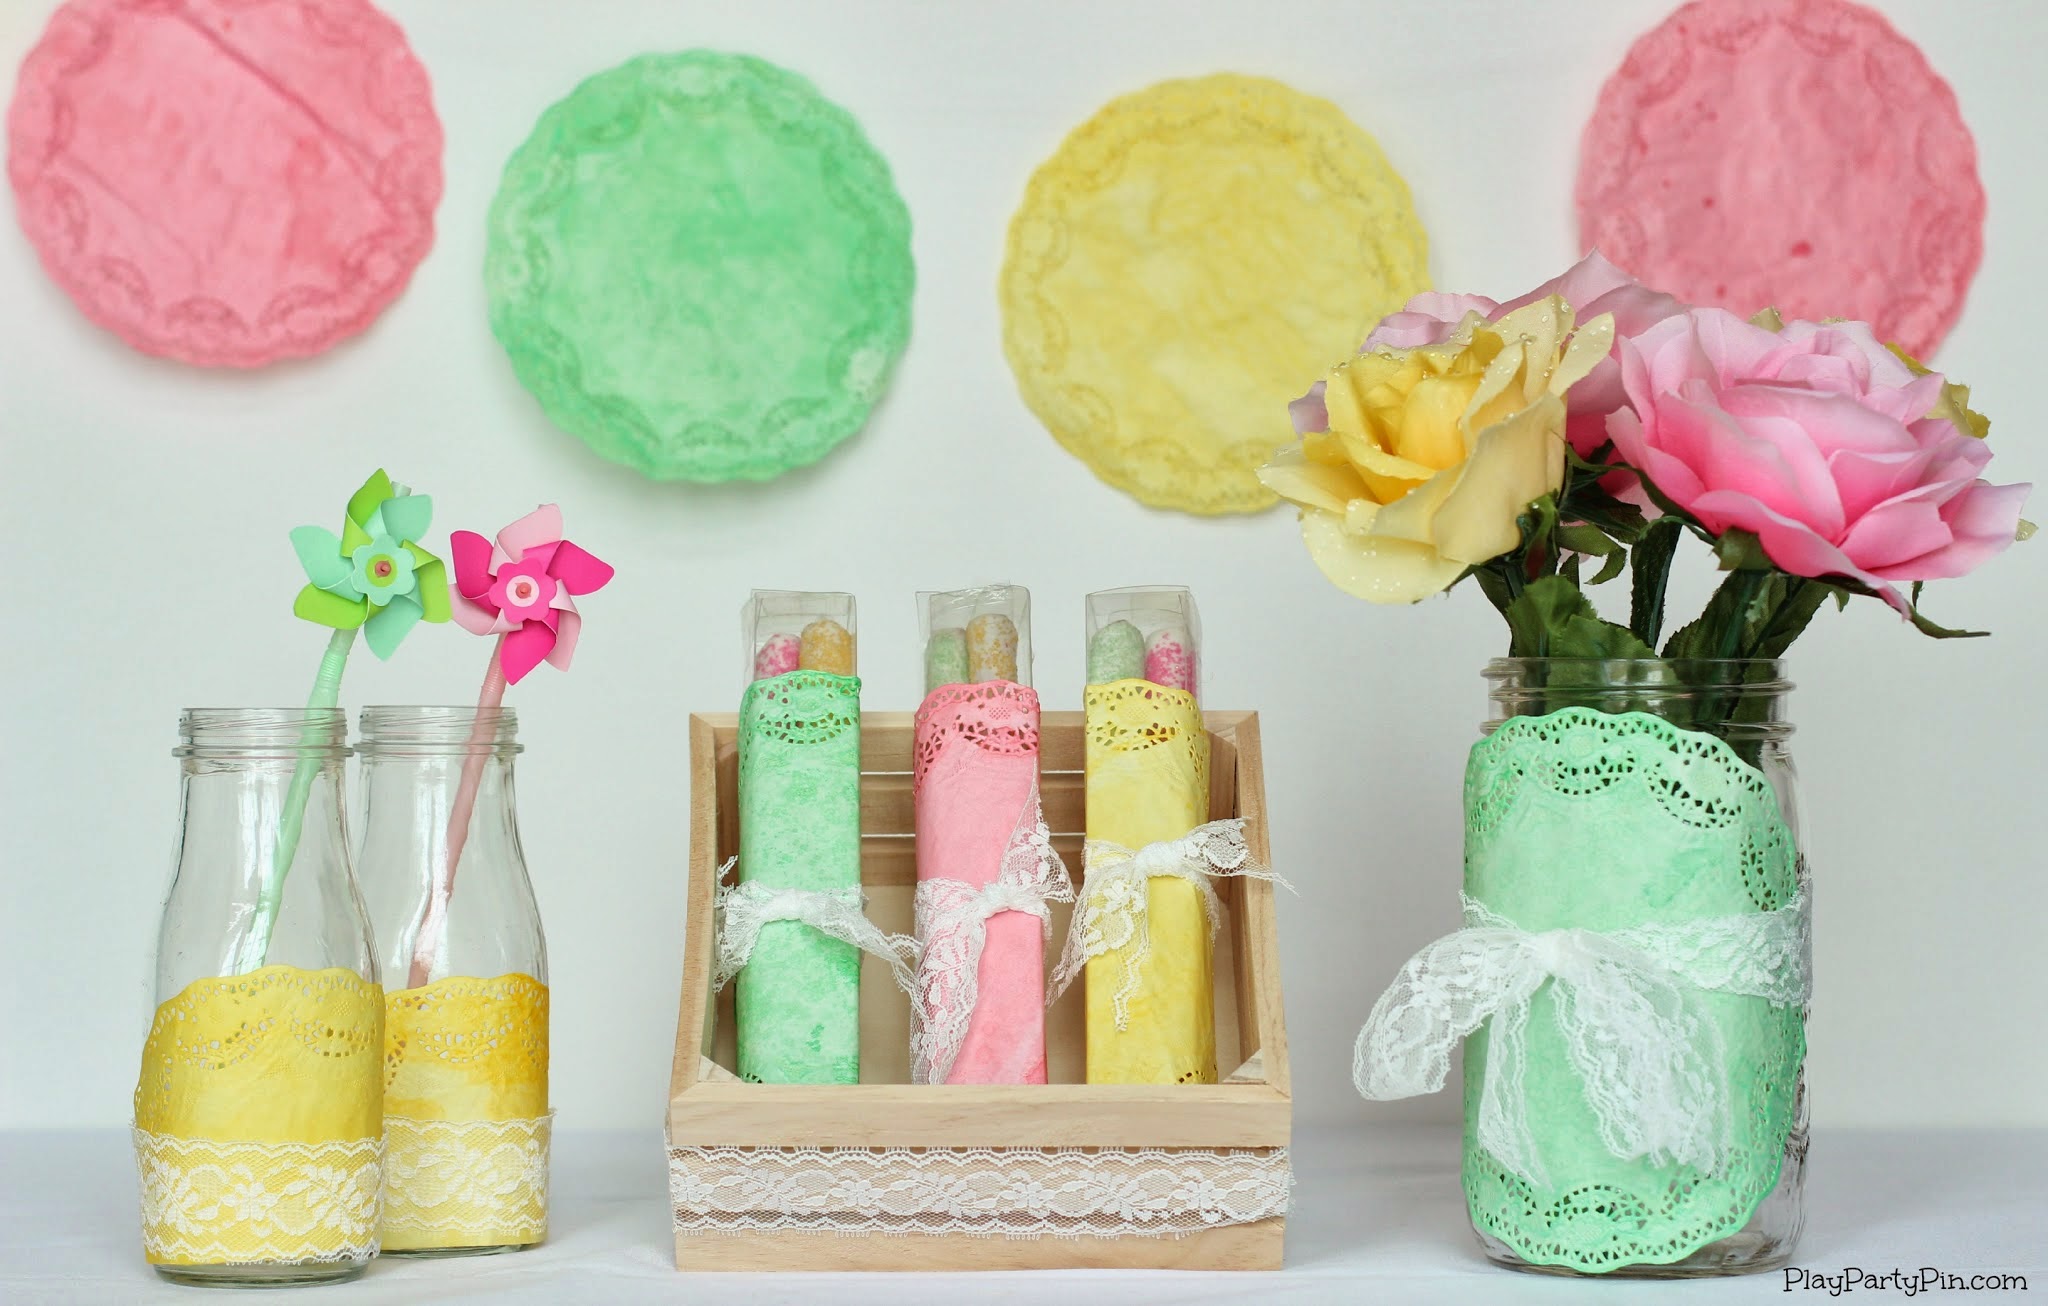 Play. Party. Pin.: Simple DIY Spring Baby Shower Decorations